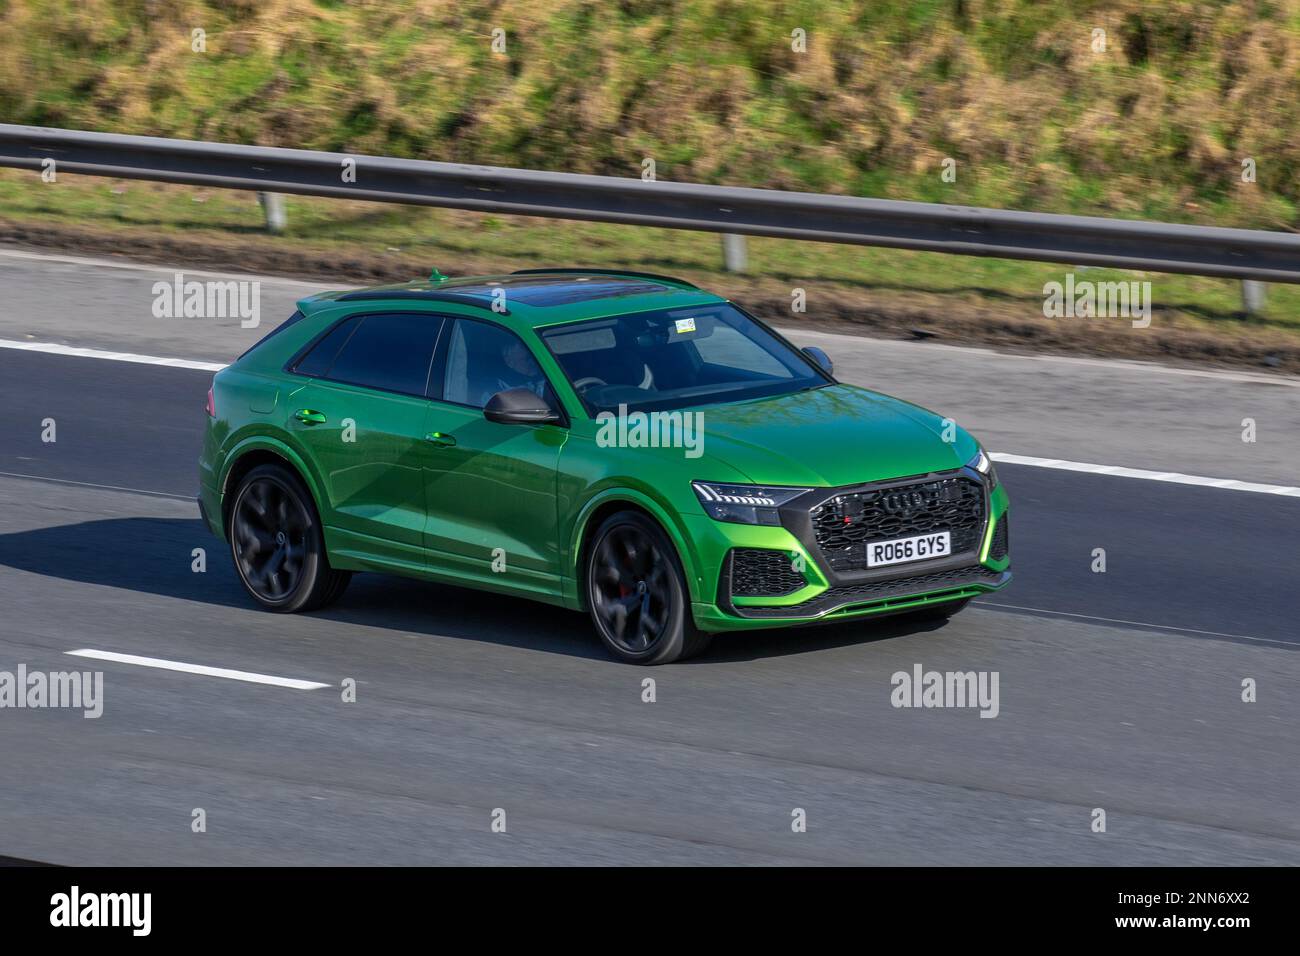 2020 Green AUDI RS Q8 CARBN BLK TFSI MHEV QT A RS VORSPRUNG QUATTRO 3996cc Petrol 8-speed automatic Roadster, moving, being driven, electric cars in motion, travelling on the M6 motorway, UK Stock Photo